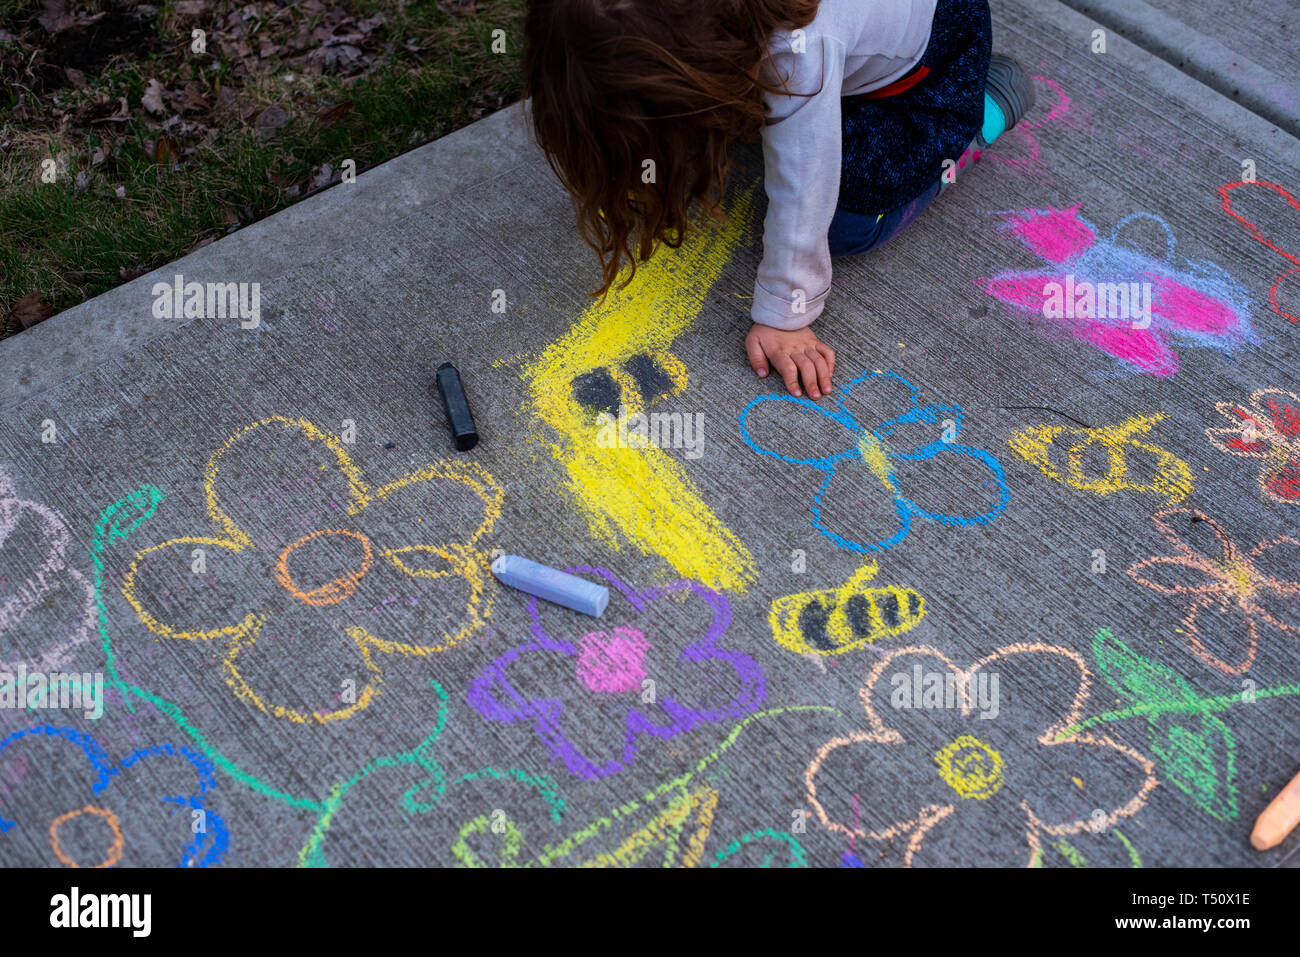 A Young Girl Drawing With Sidewalk Chalk On The Sidewalk In Summer Stock Photo Alamy